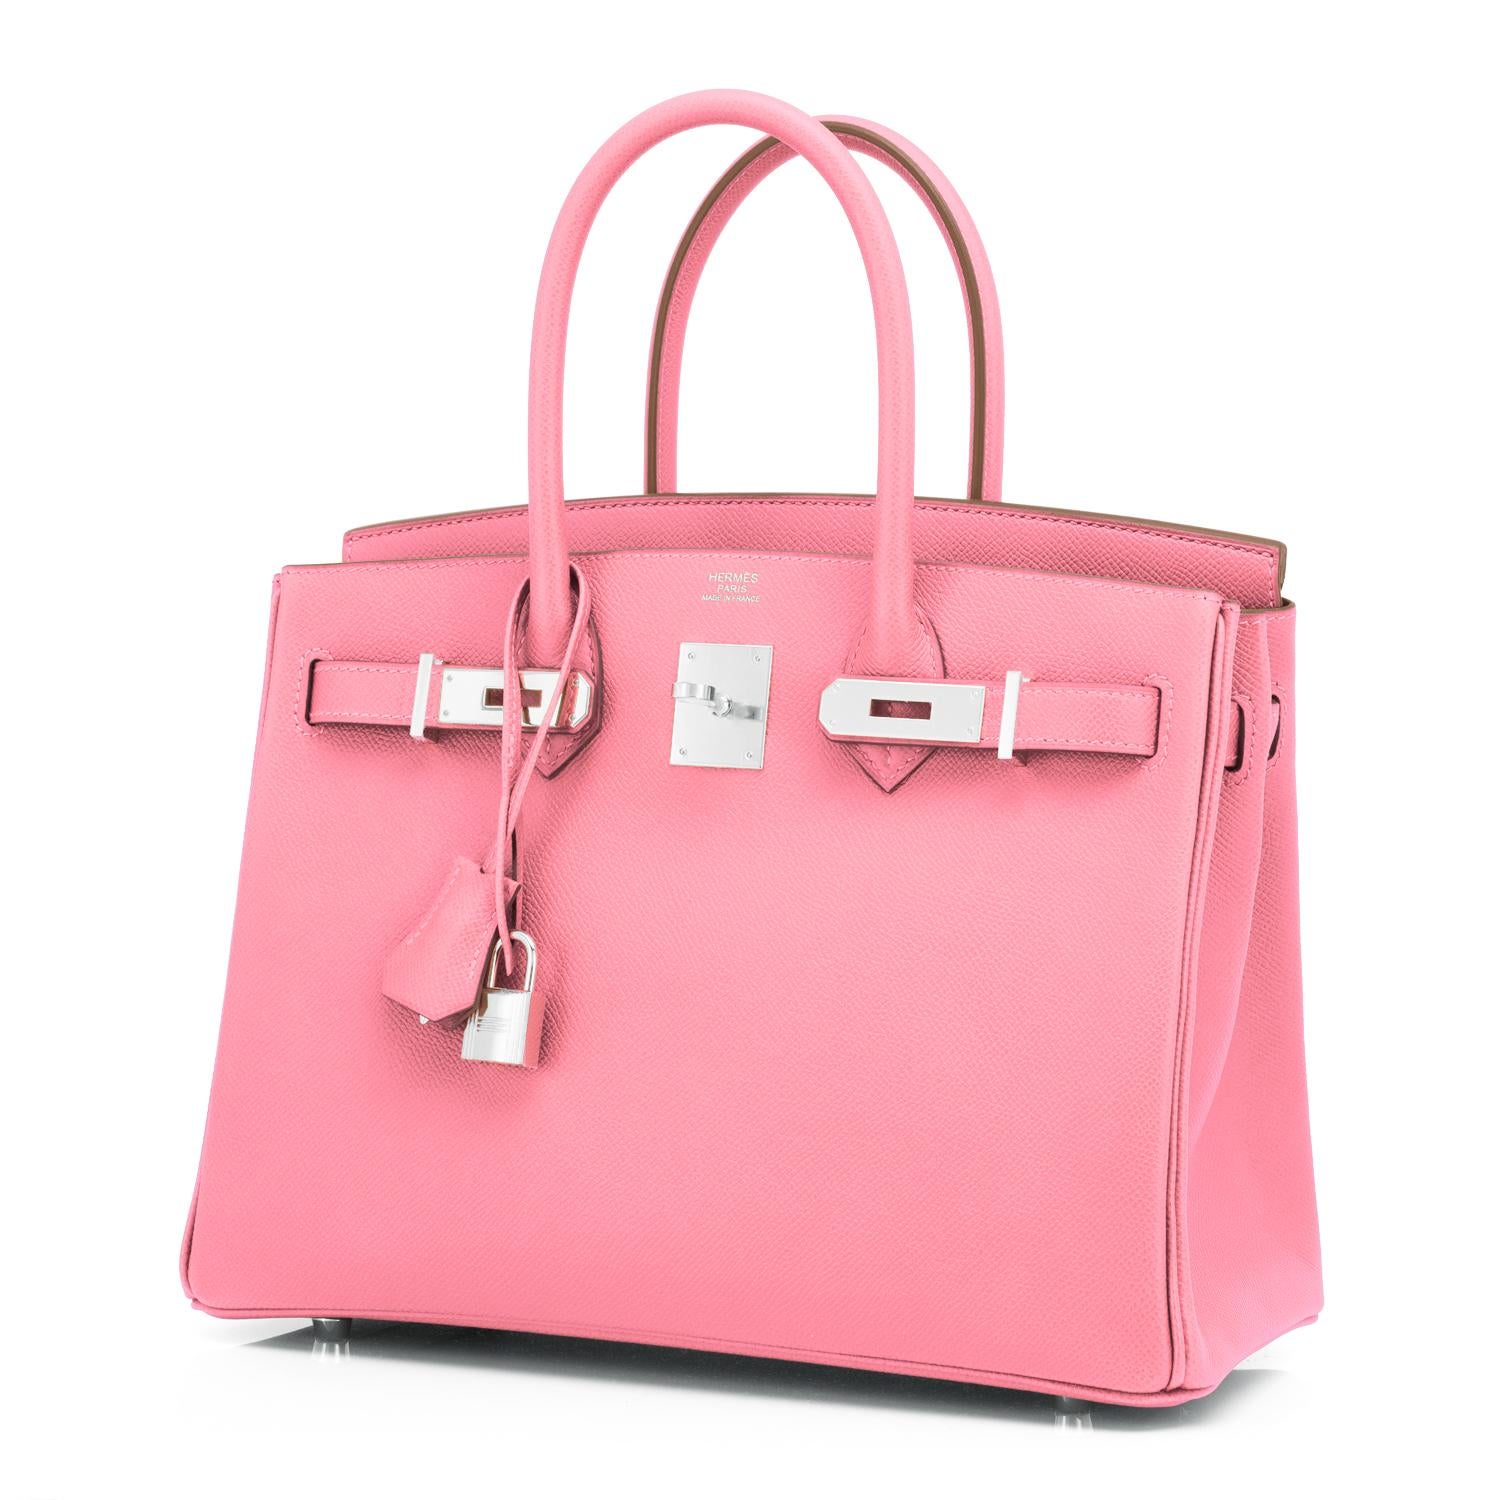 Hermes Birkin 30cm Rose Confetti Pink Epsom Palladium Y Stamp, 2020
Brand New in Box. Store Fresh. Pristine Condition (with plastic on hardware).
Just purchased from Hermes store; bag bears new interior 2020 Y stamp.
Perfect gift! Comes full set